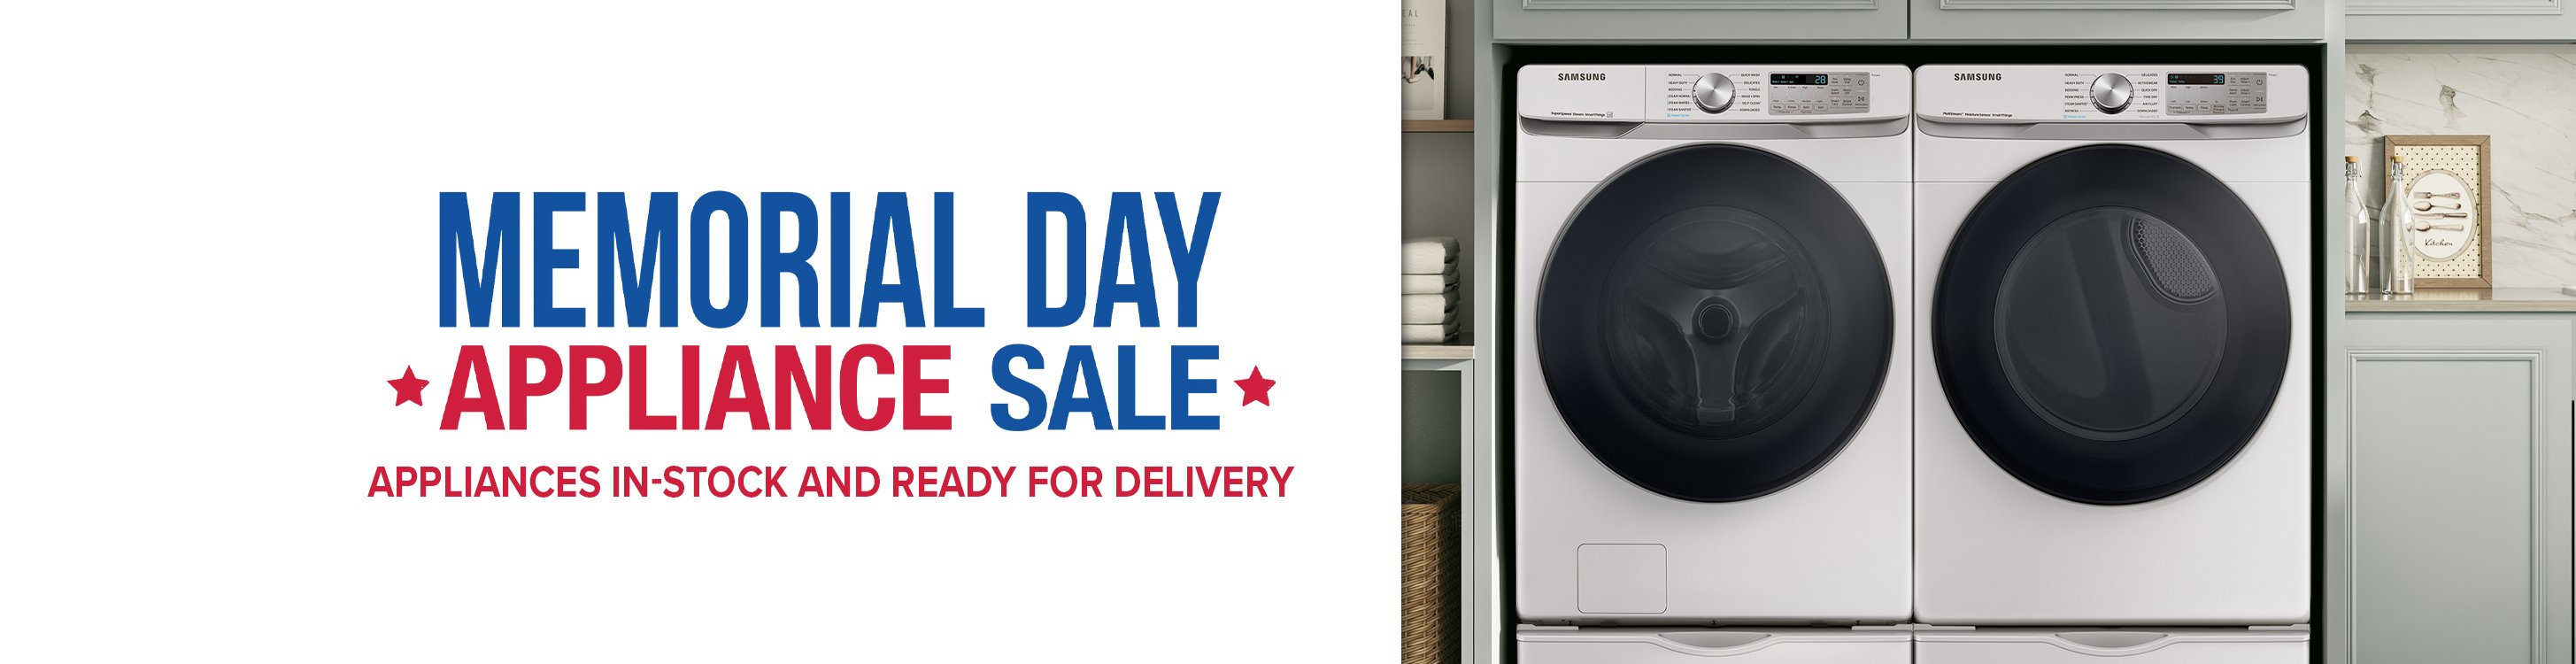 RC Willey's 2022 Memorial Day Appliance Savings